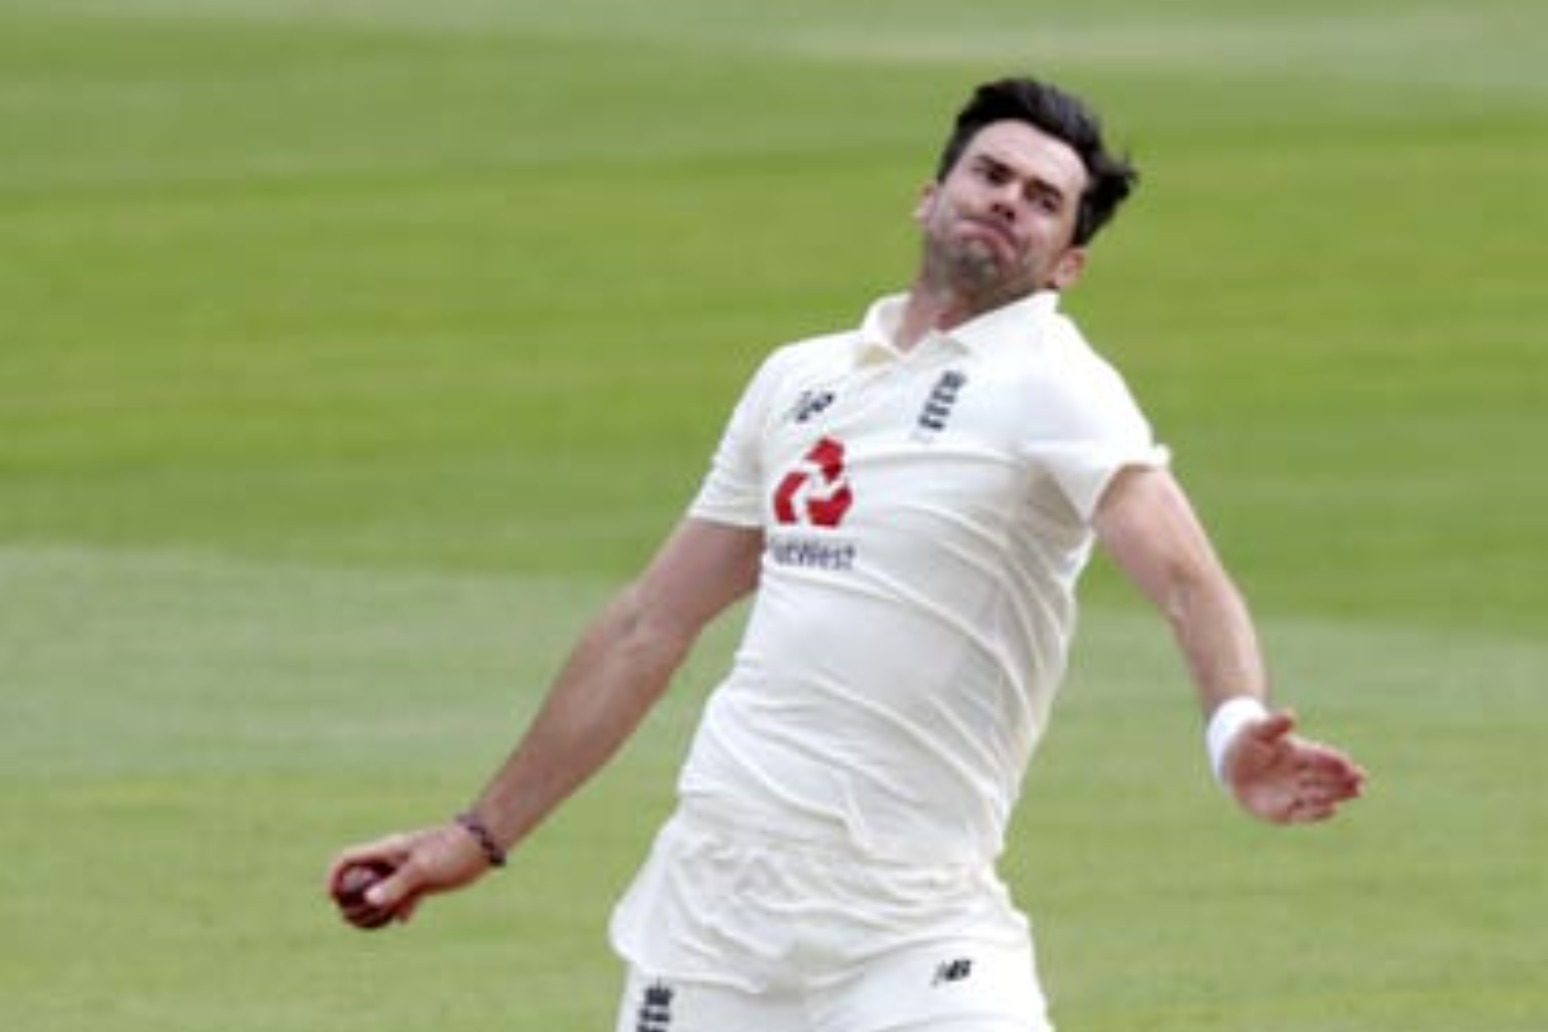 James Anderson stars on final morning as England seal first Test win over India 